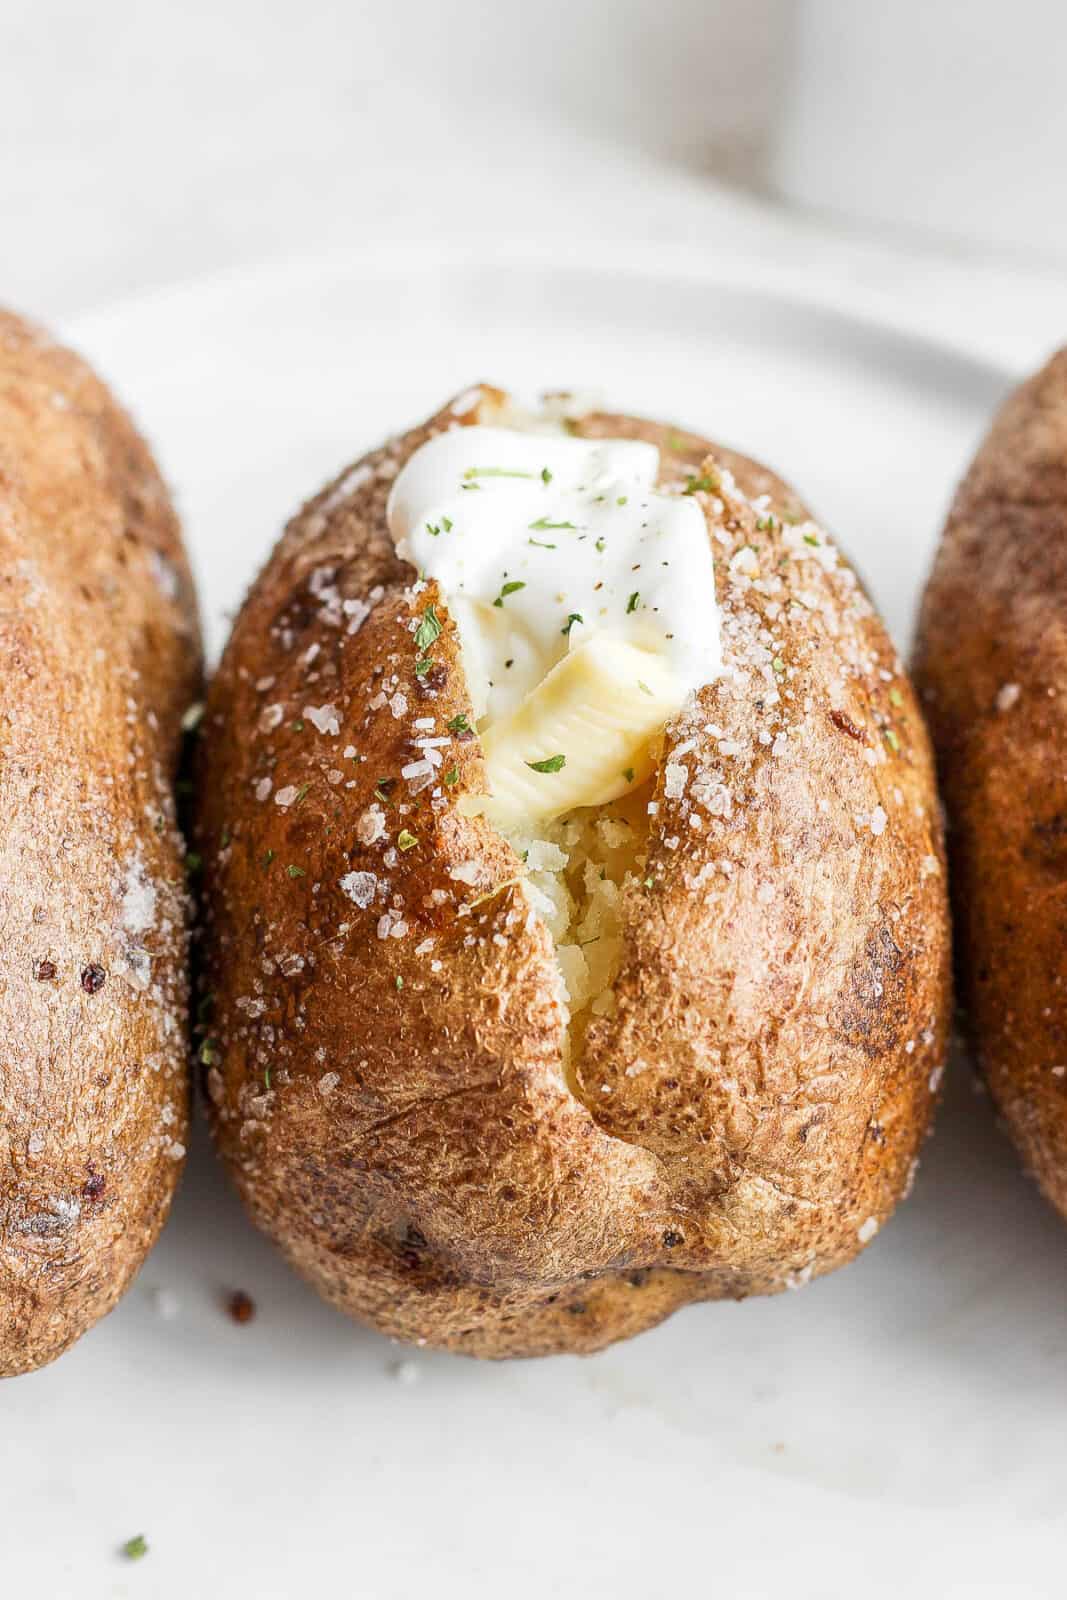 Close up of one oven baked potato cut down the middle filled with butter, sour cream, and light seasonings.